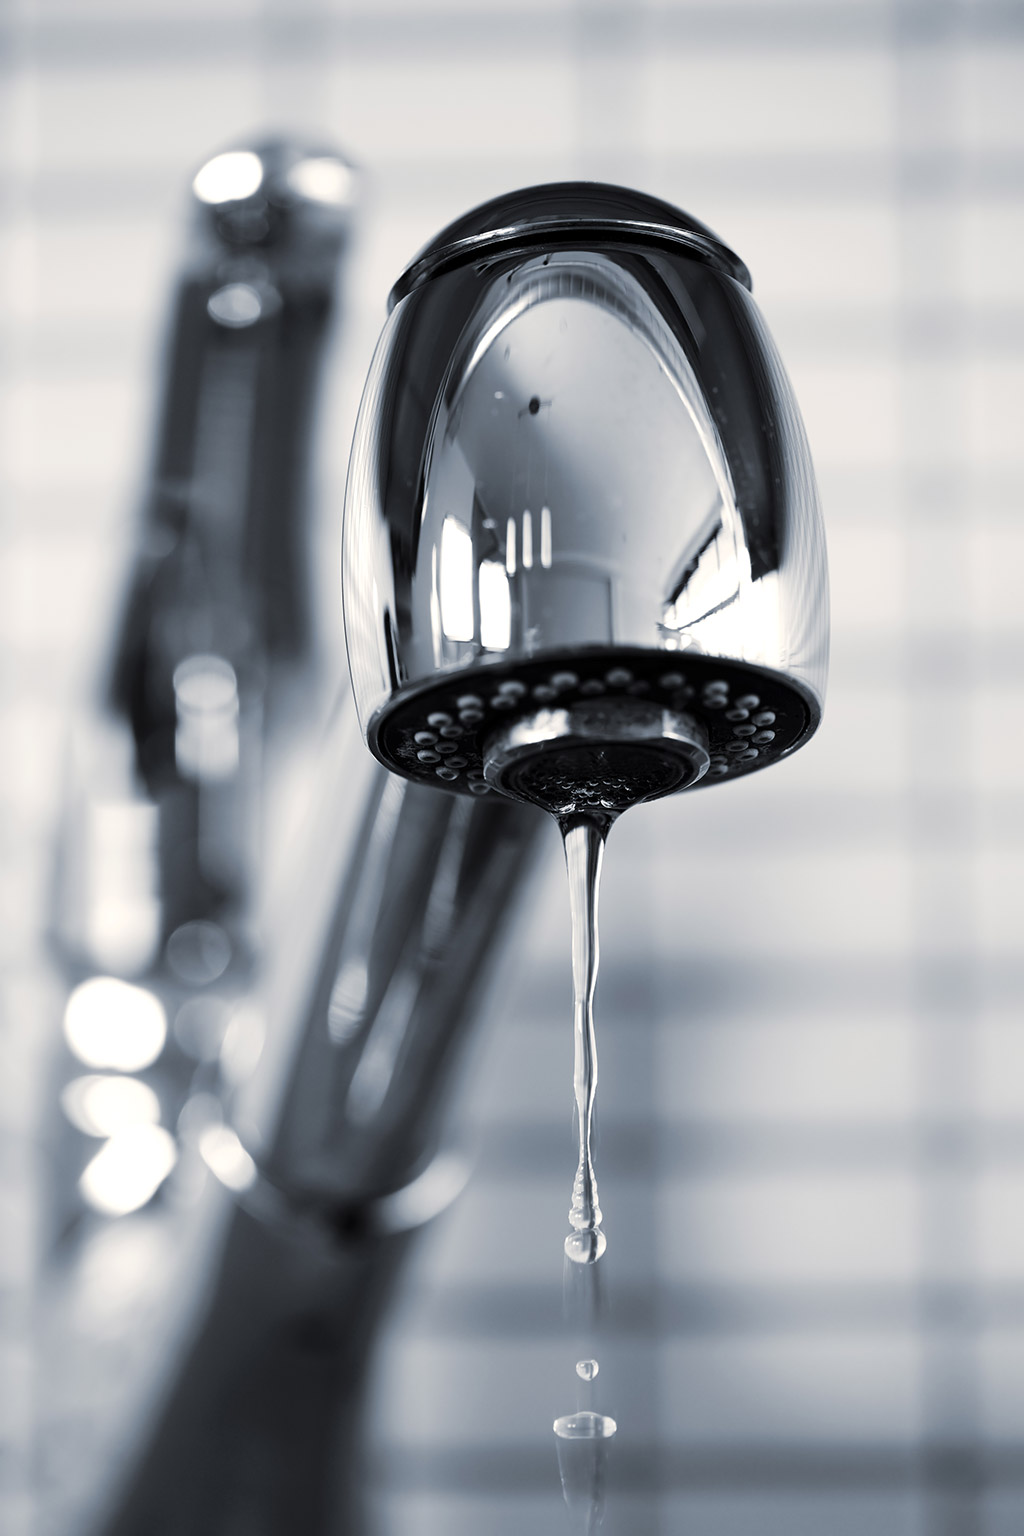 Inconsequential Plumbing Issues With Consequential Outcomes Local Plumber in Cleveland TN